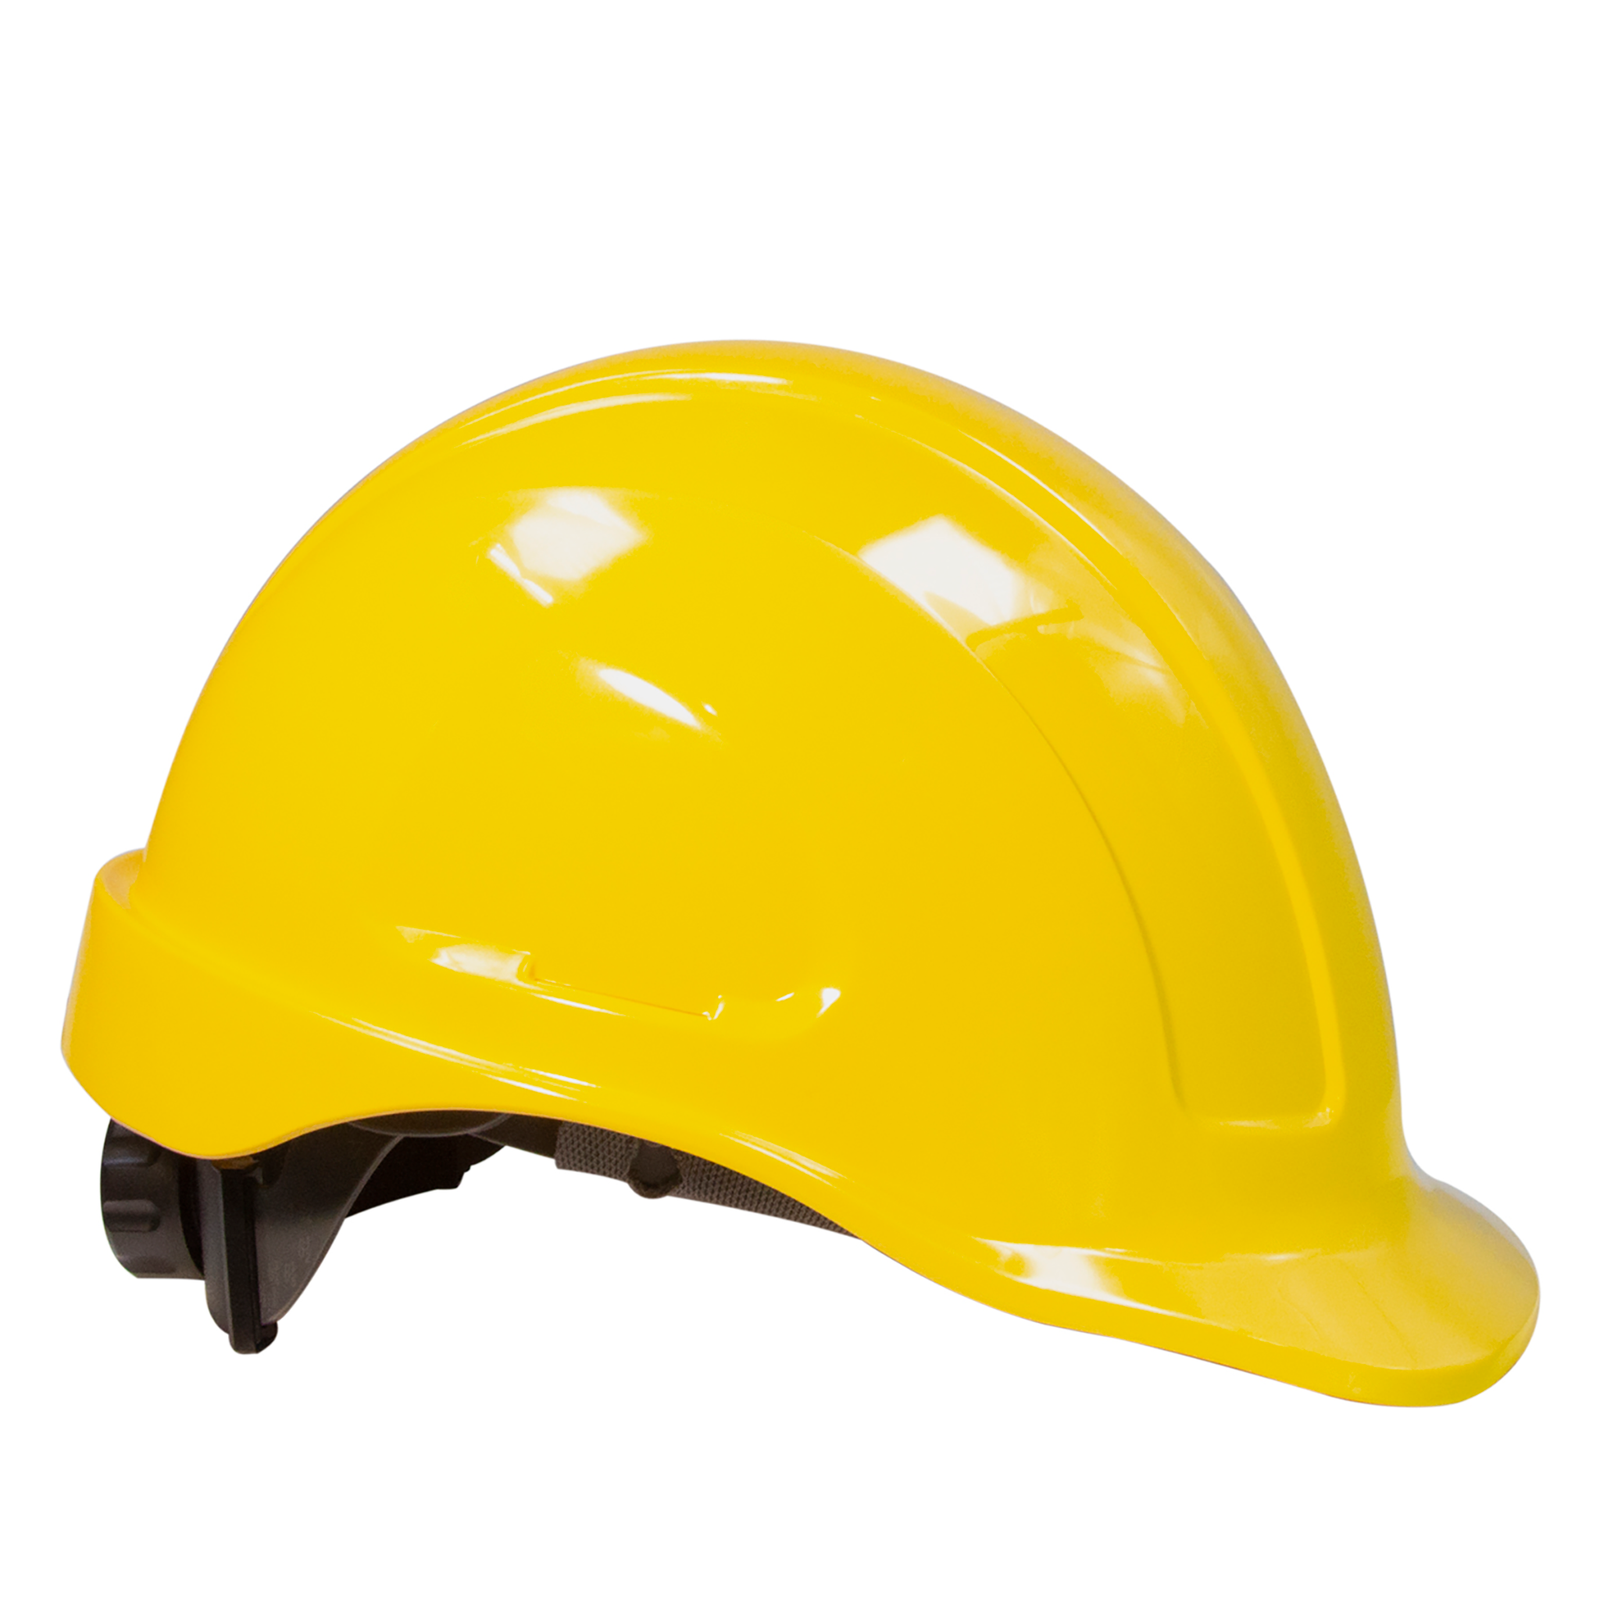 PPE by JORESTECH - HDPE Cap Style Hard Hat Helmet for Work, Home, and General Headwear Protection (s-hhat-01)